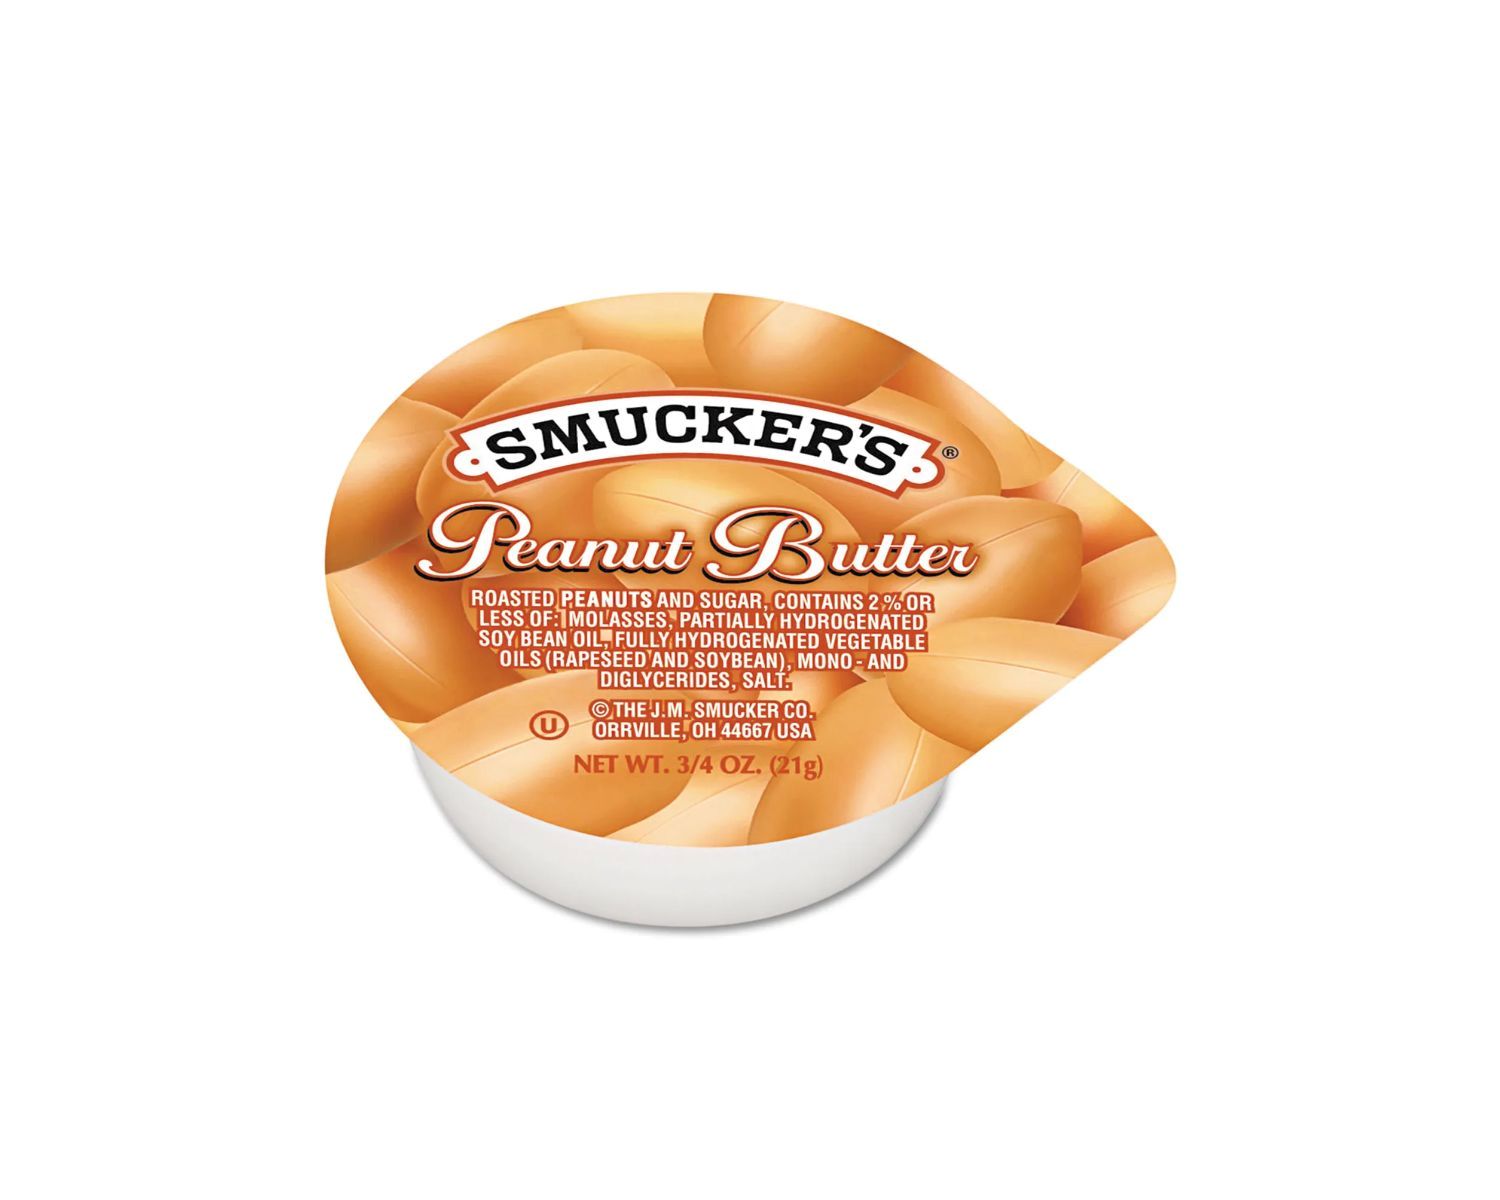 11-smuckers-peanut-butter-packets-nutrition-facts